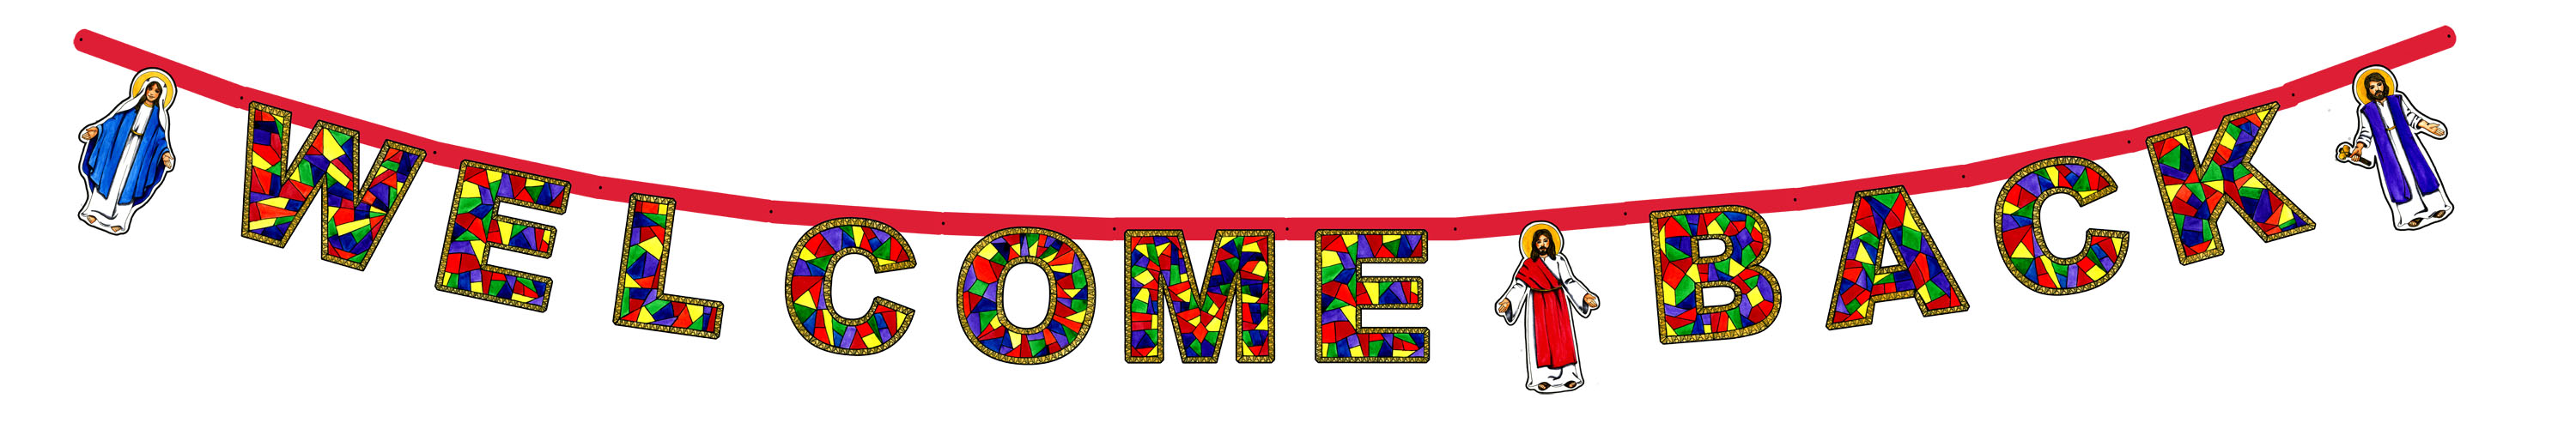 Welcome Home Road Sign Clipart.